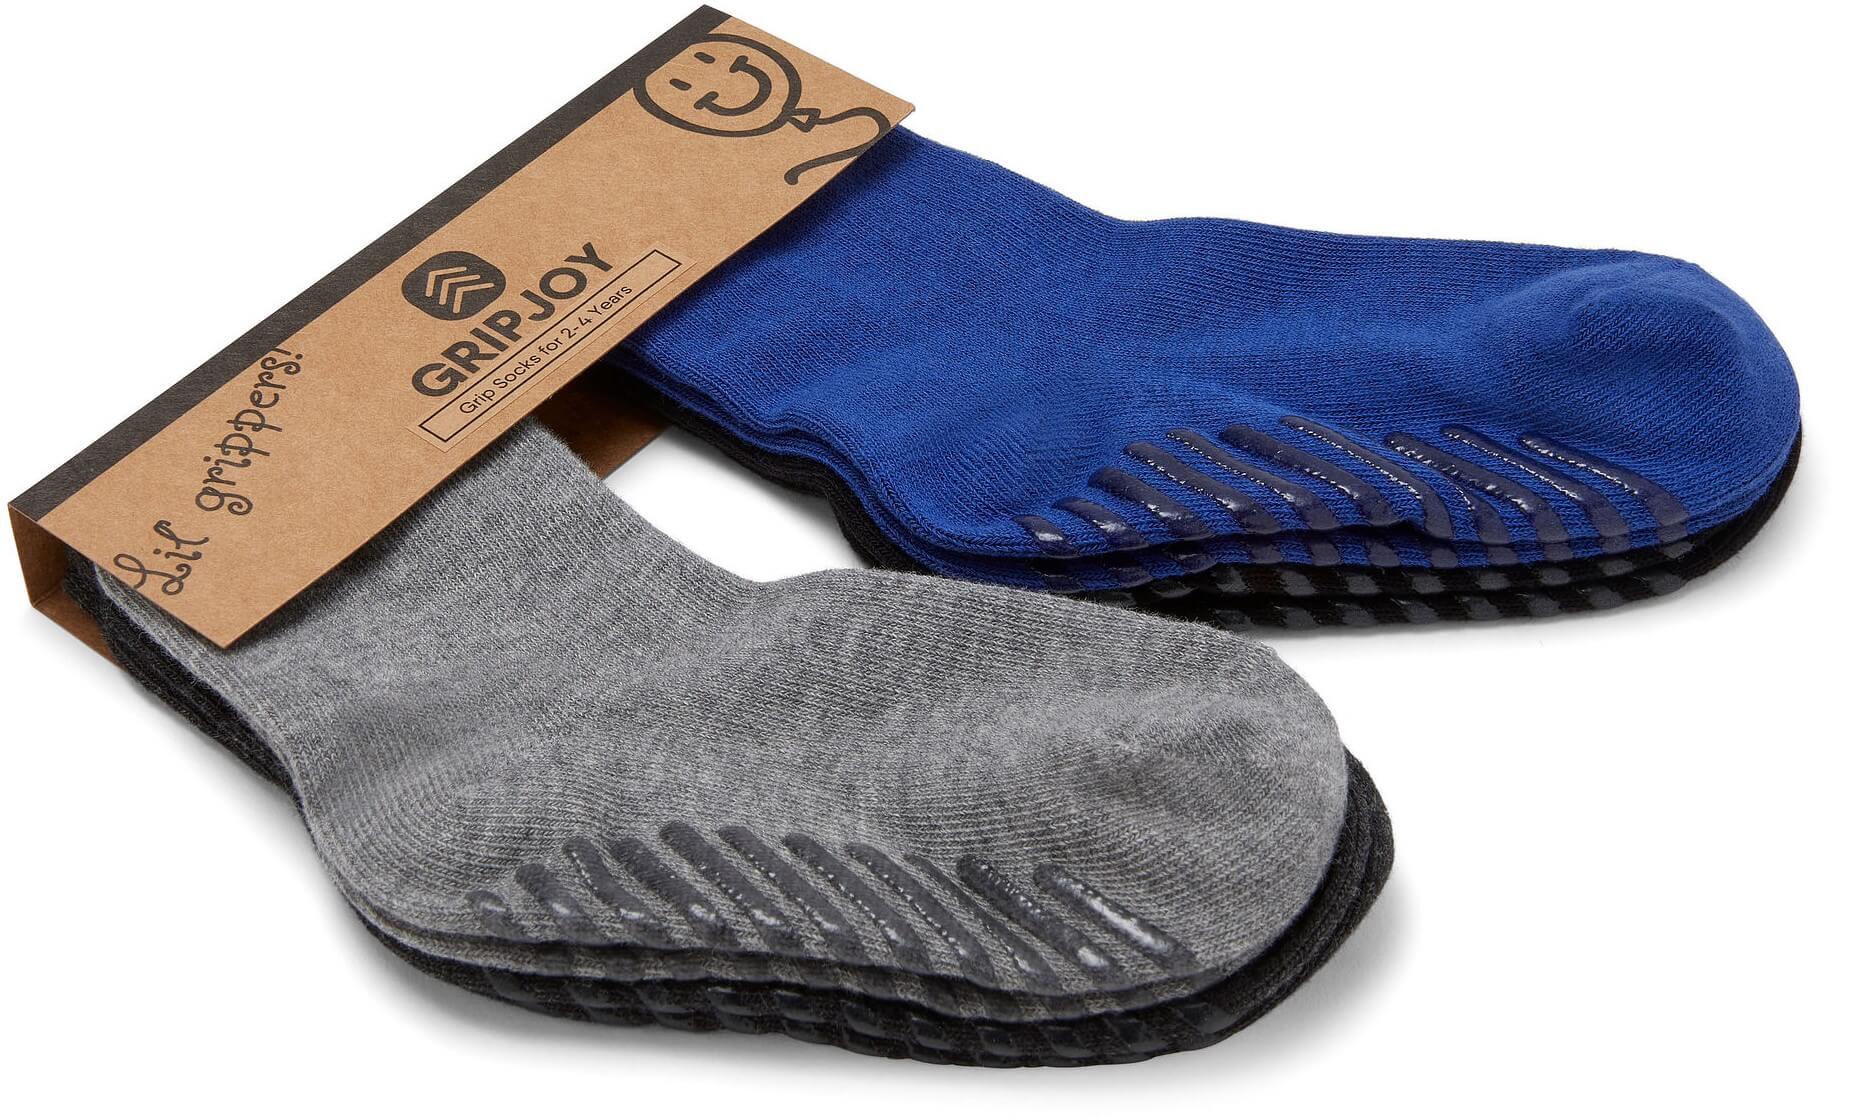 skid proof socks for toddlers